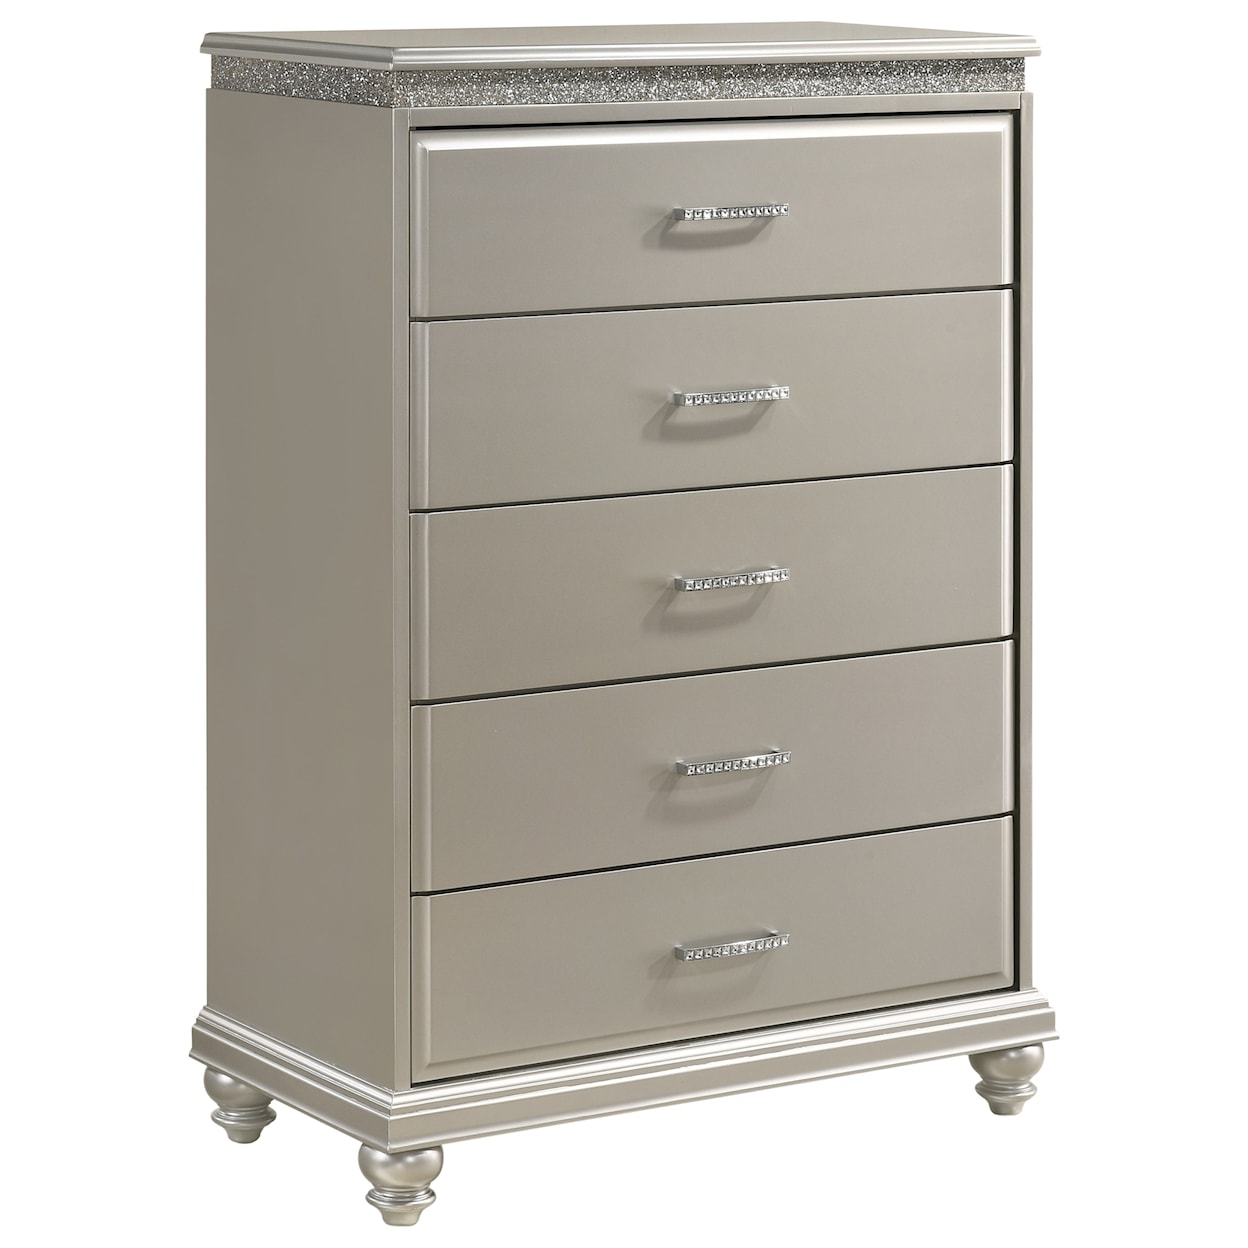 Crown Mark VALIANT Chest of Drawers